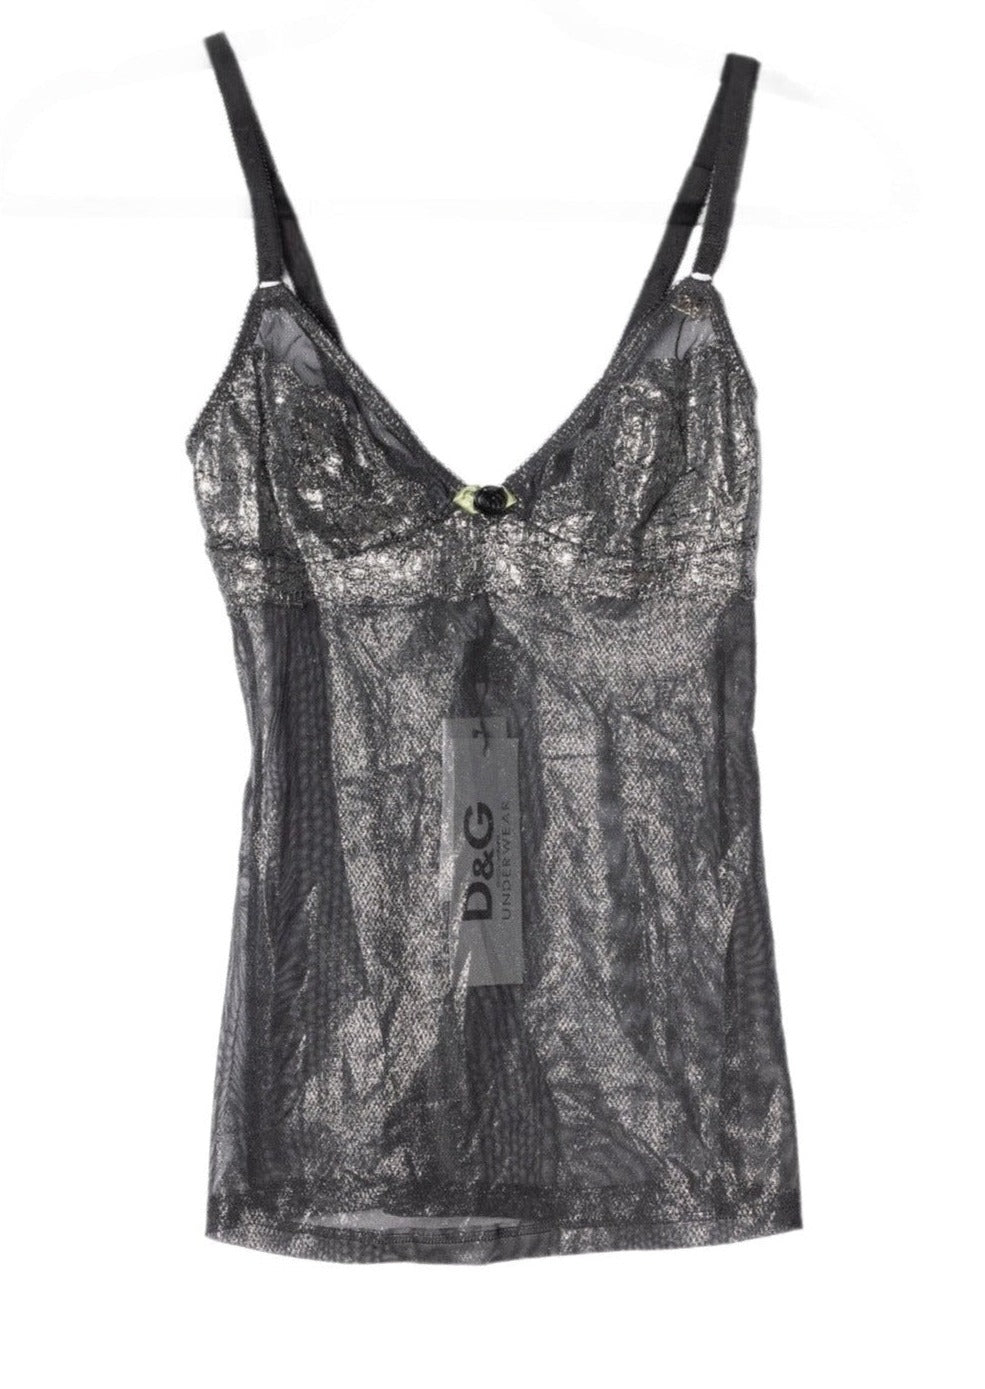 Vintage Dolce and Gabbana Shimmer Black Top - Camisole with adjustable straps, D&G charm, and black rose detail. Size XS. New with tags.